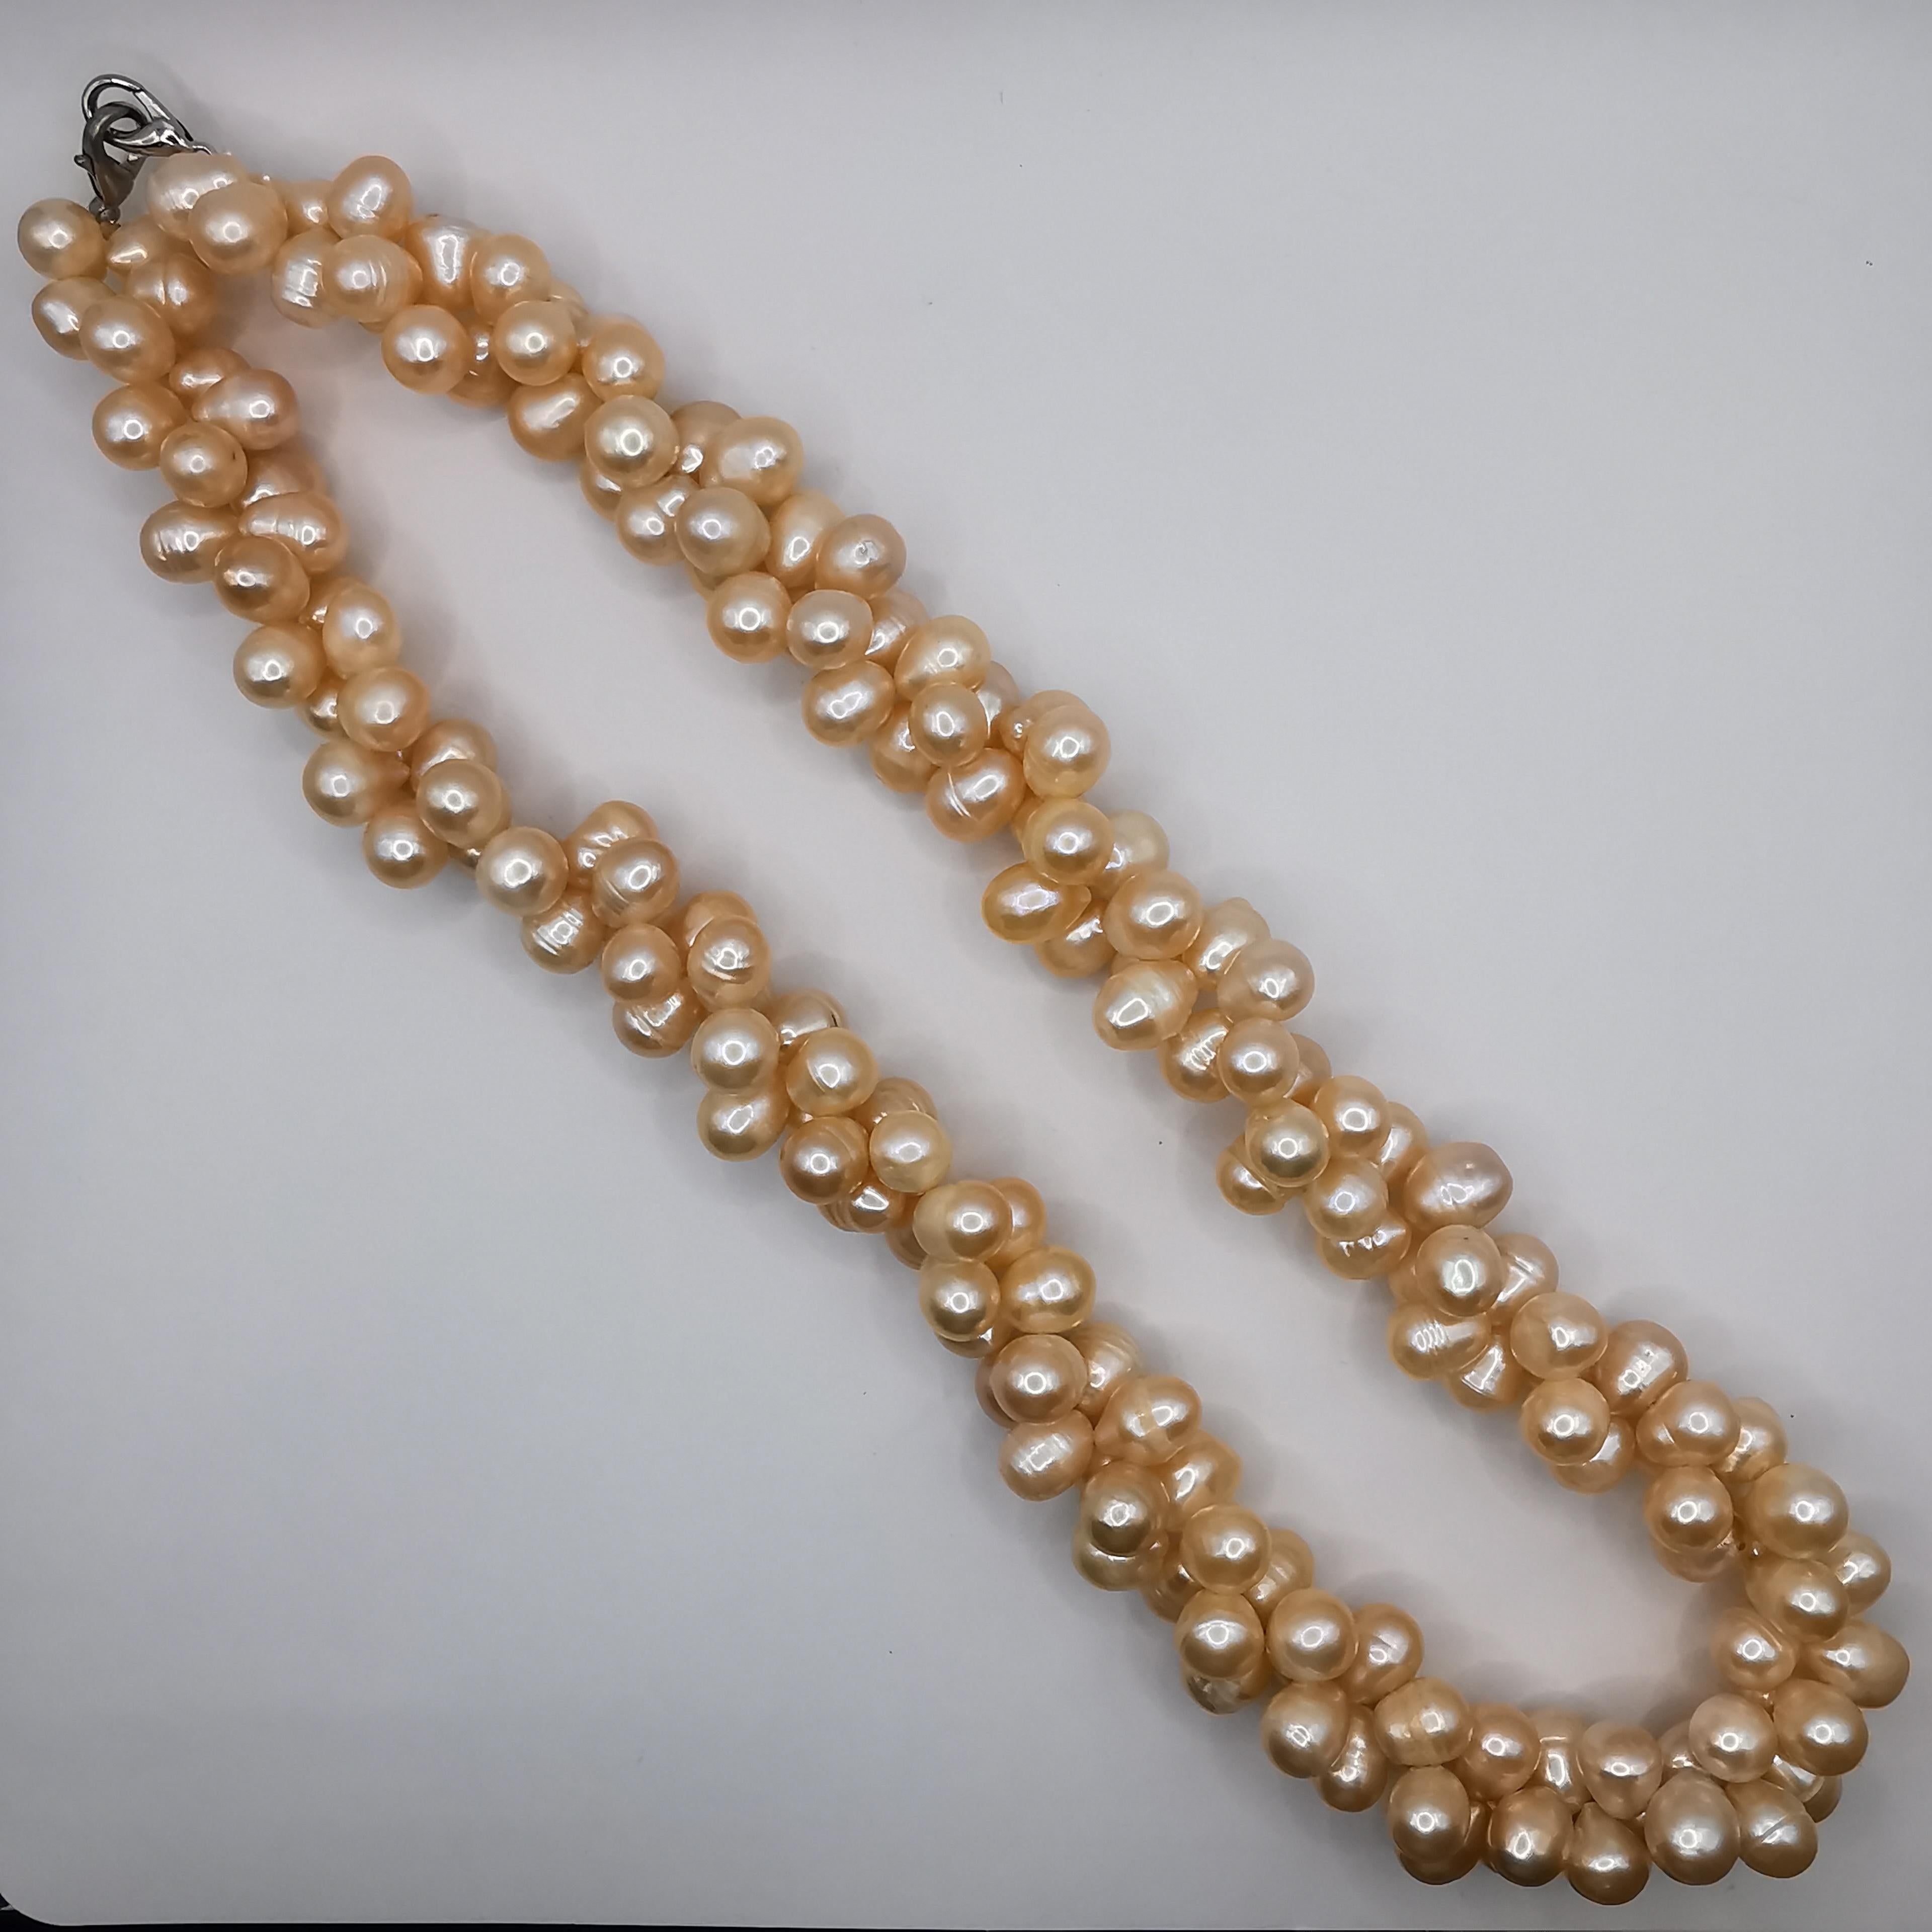 This dual twisted freshwater cultured baroque peach pearl necklace is a beautiful and elegant piece that is sure to impress. The necklace features a unique design, with two twisted strands of freshwater cultured baroque peach pearls that come